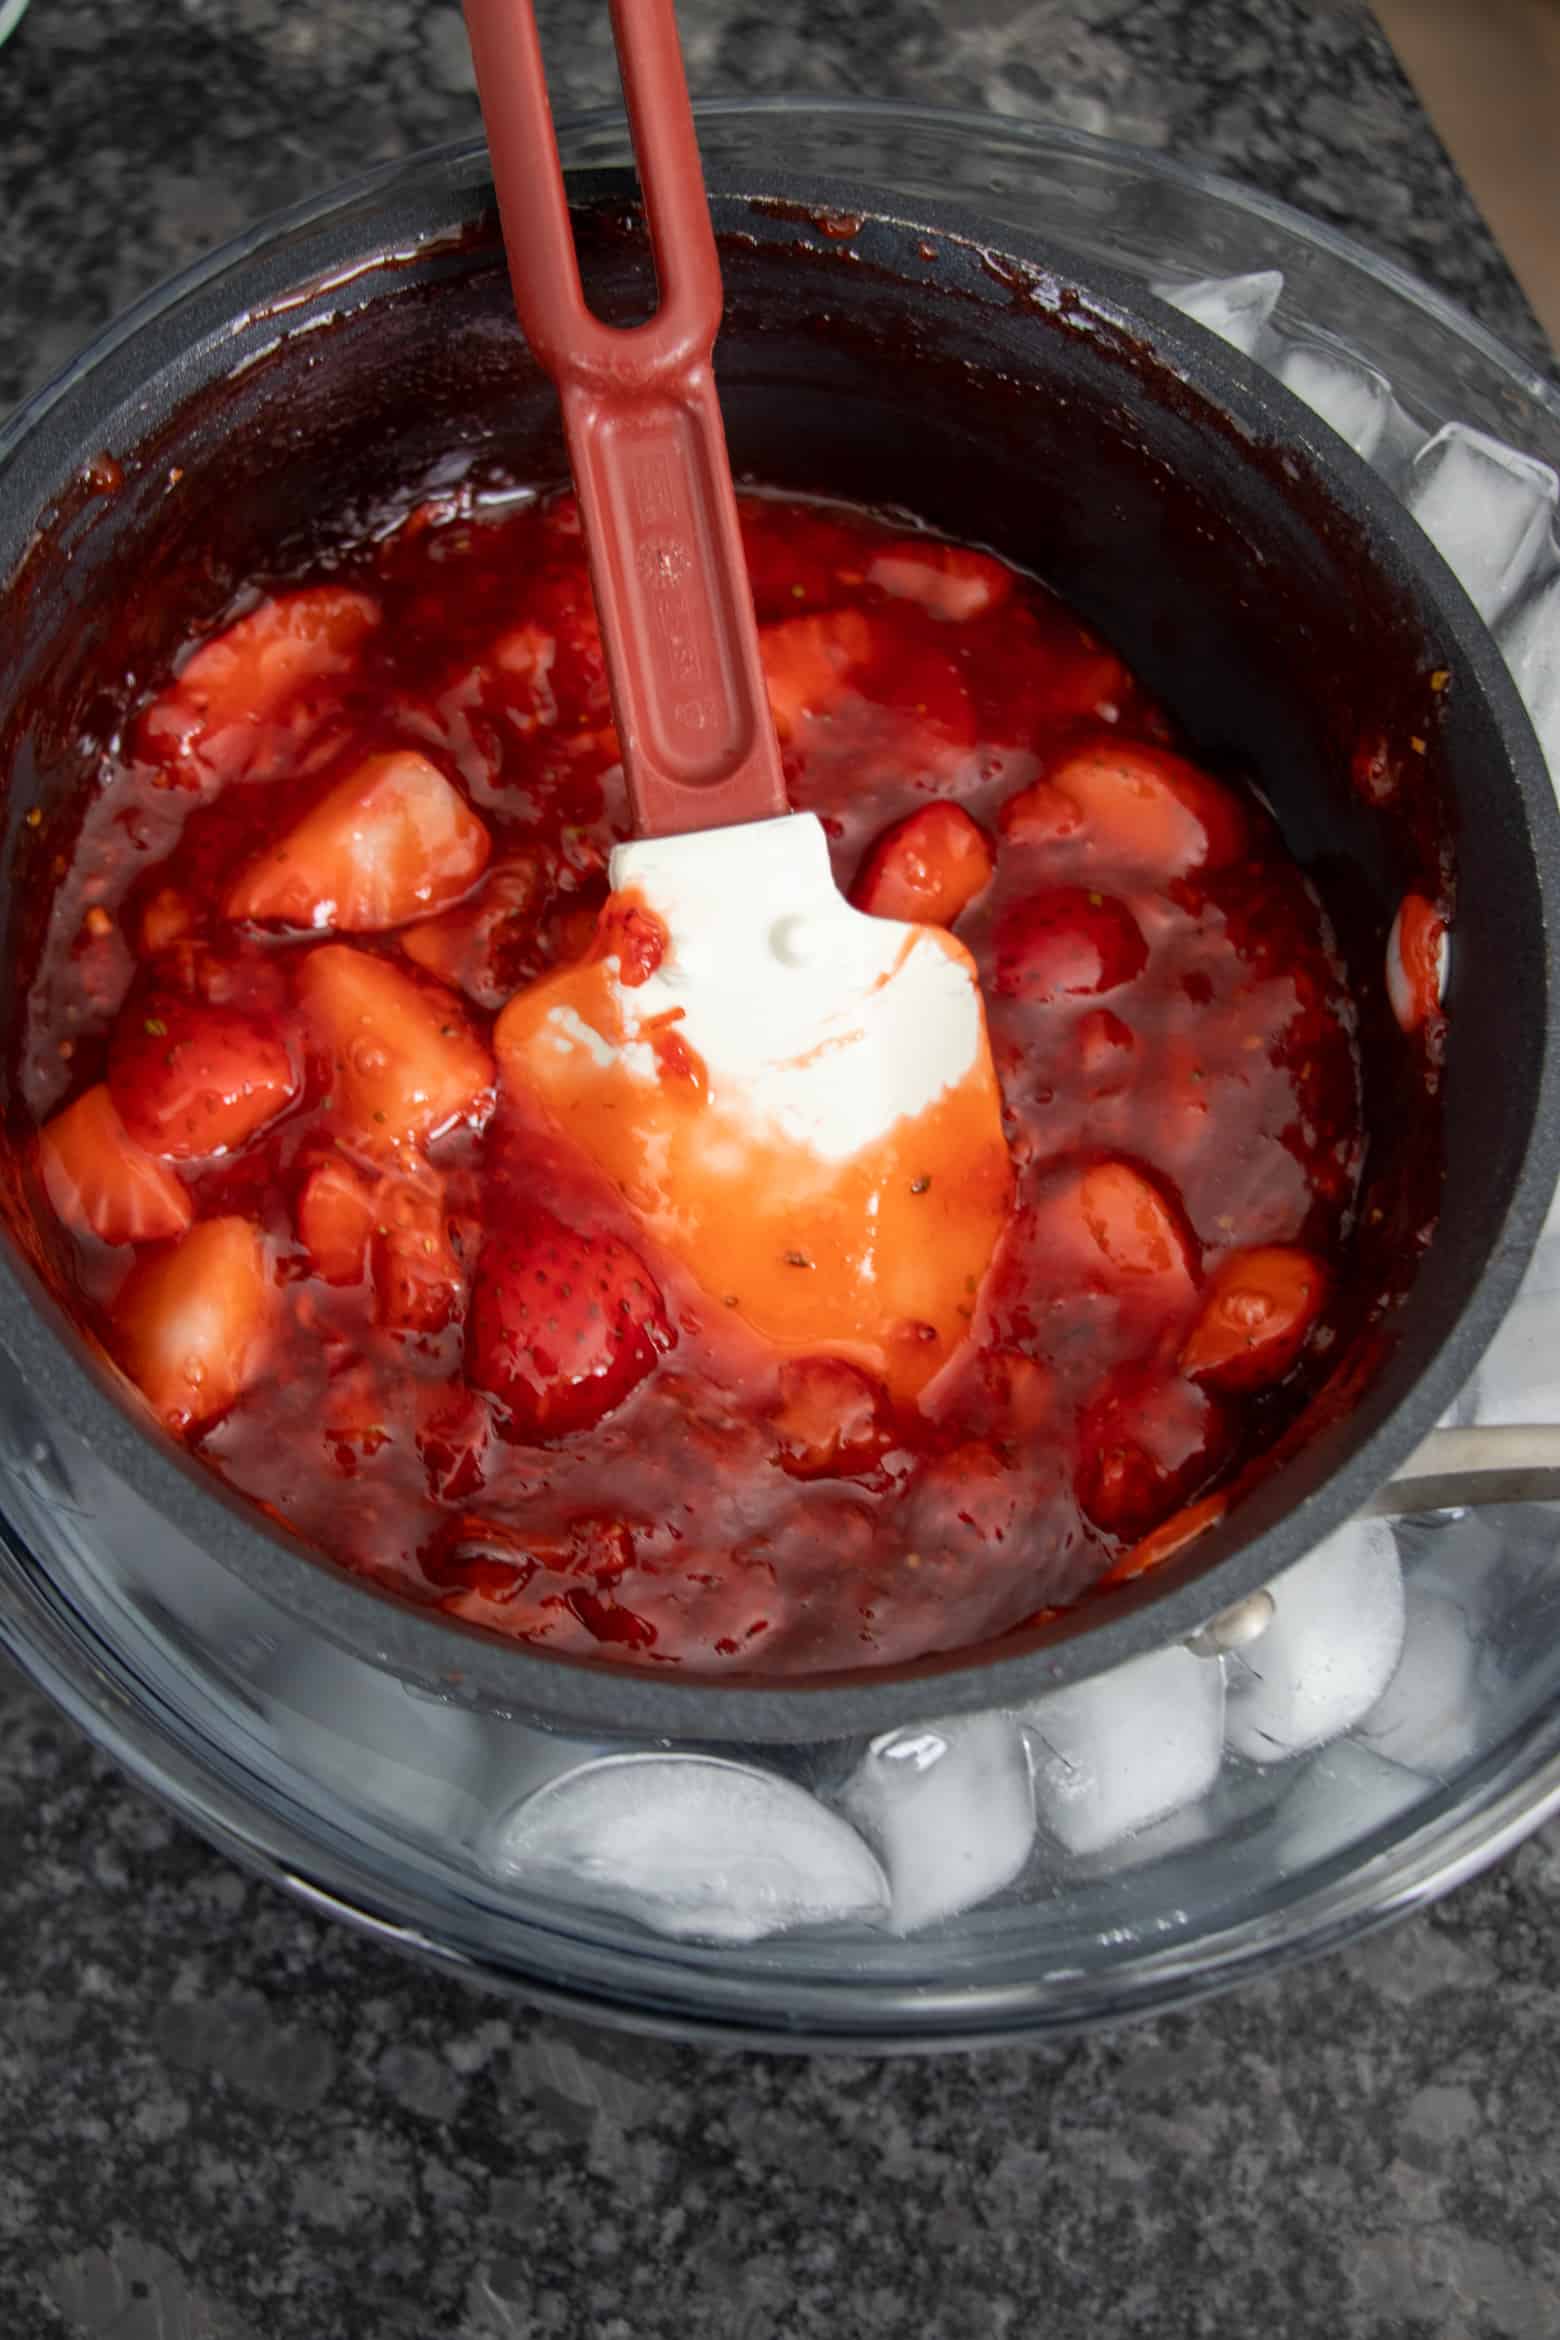 Strawberry pie filling cooling off